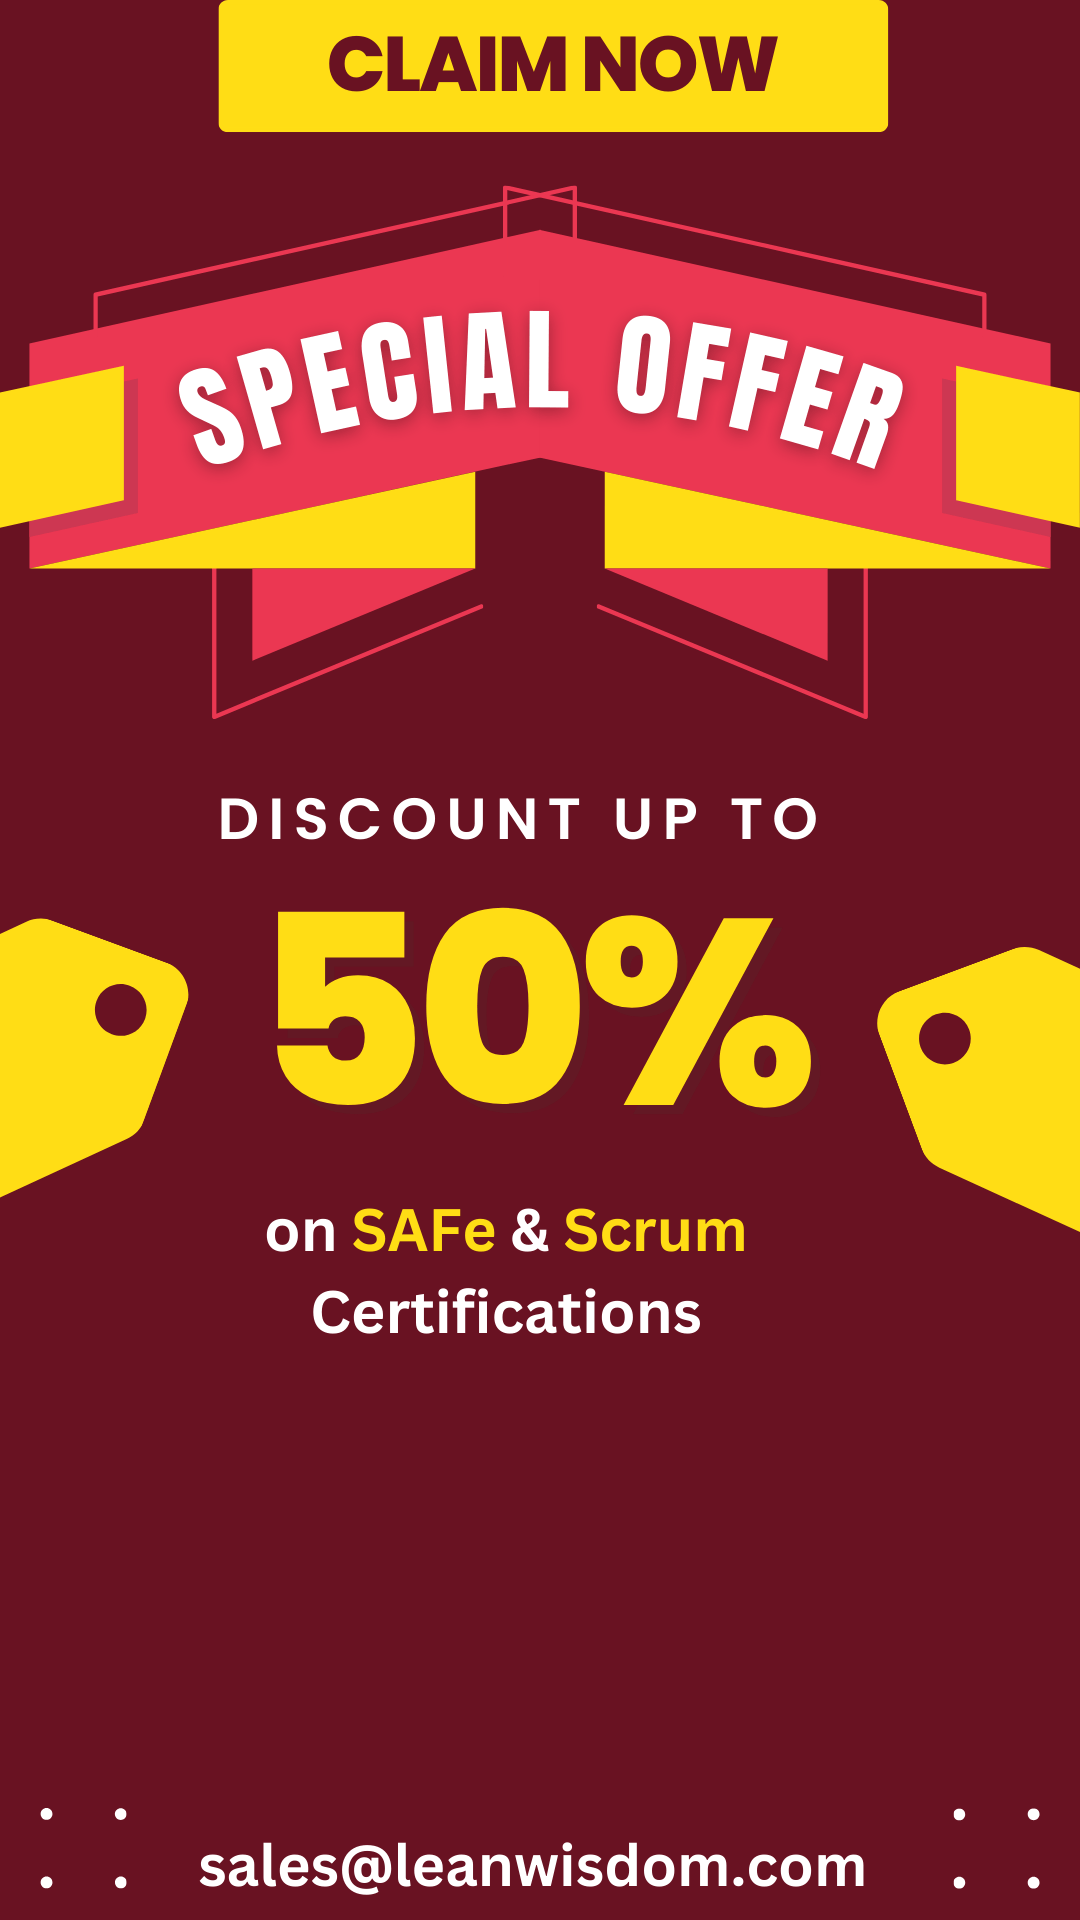 SAFe certifications discount